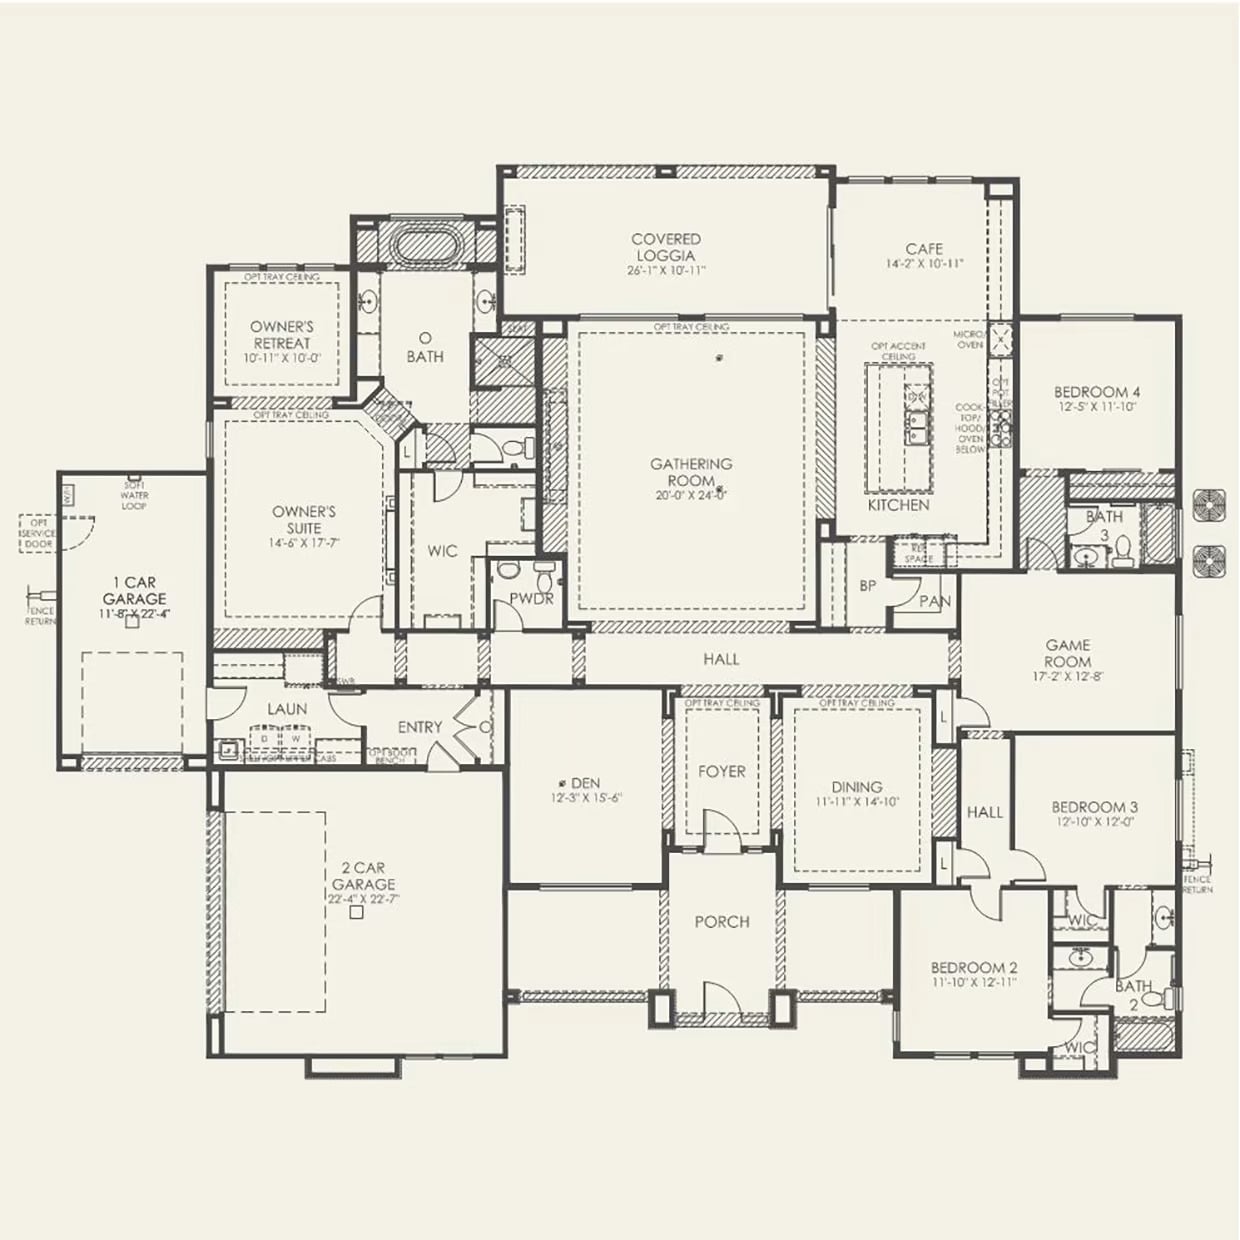 Floorplan of Royalty Model at Ascension by Pulte Homes